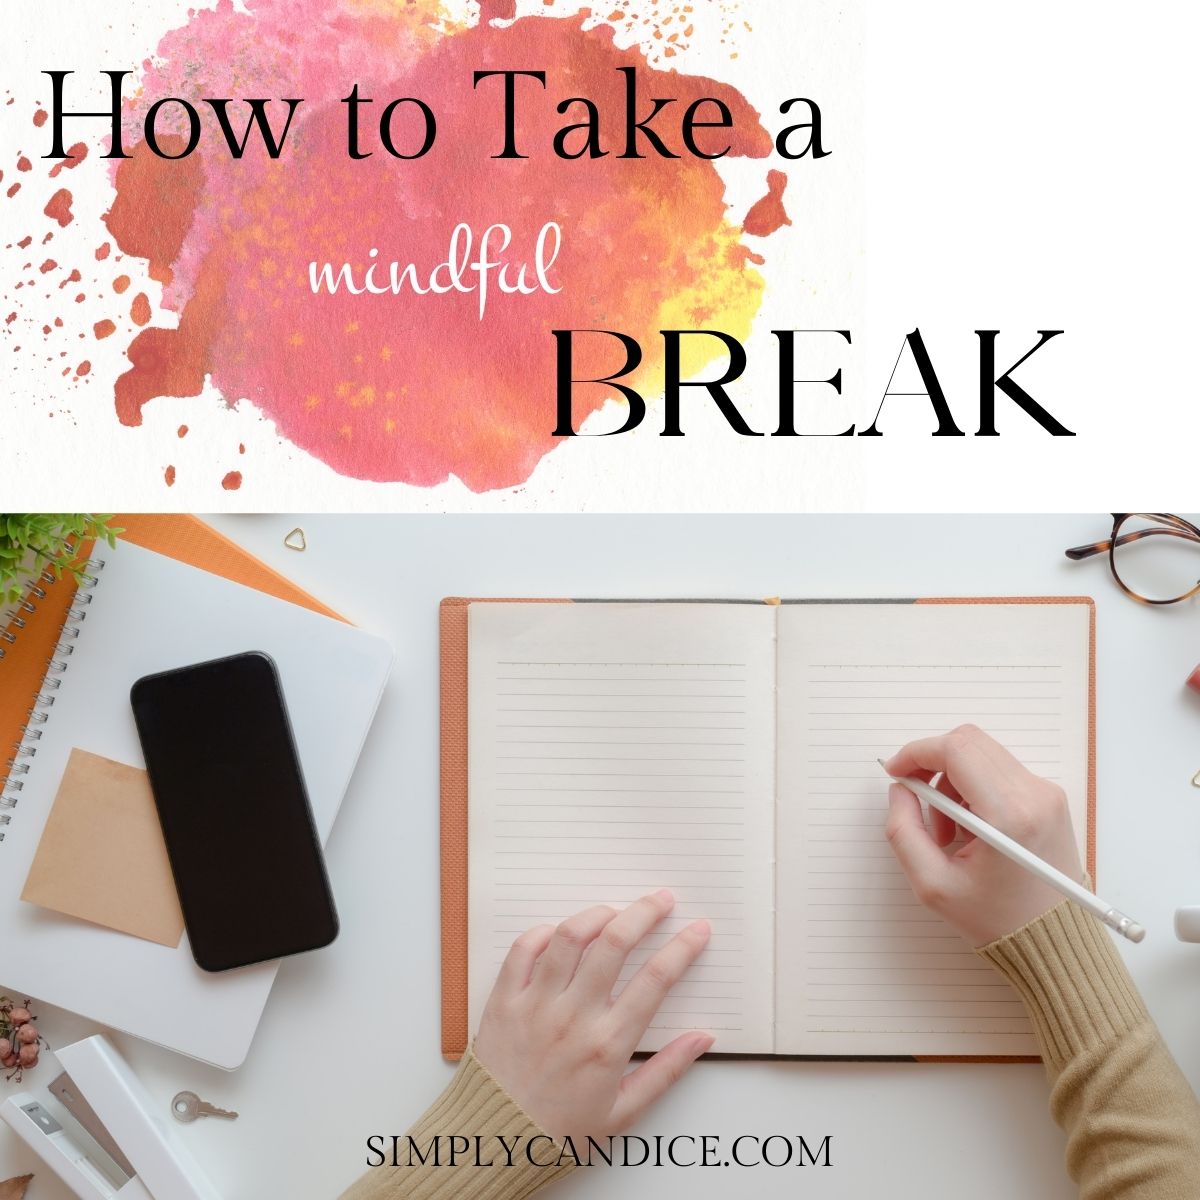 how to take a mindful break - image of writing in a journal